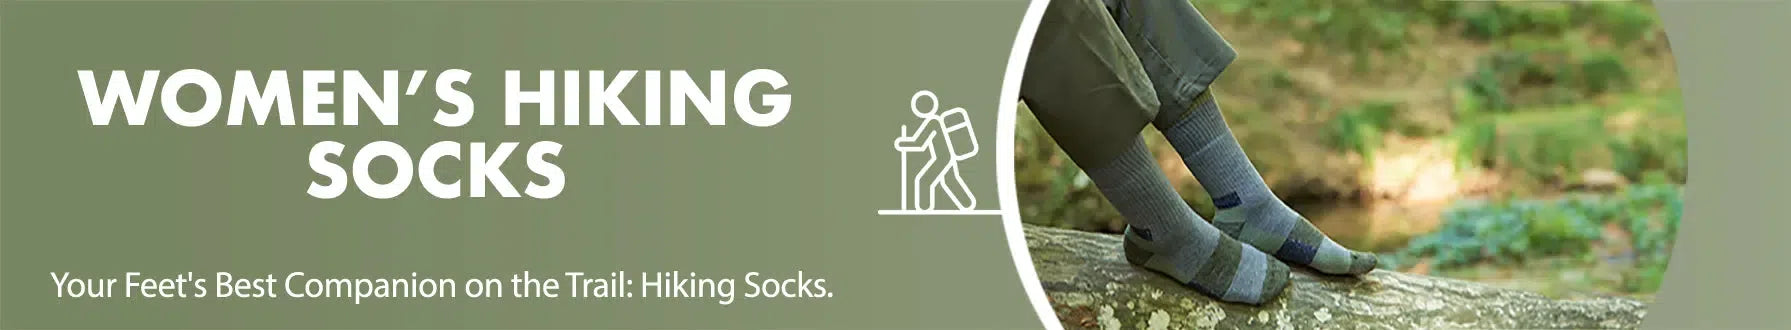 GoWith women's hiking socks collection banner desktop